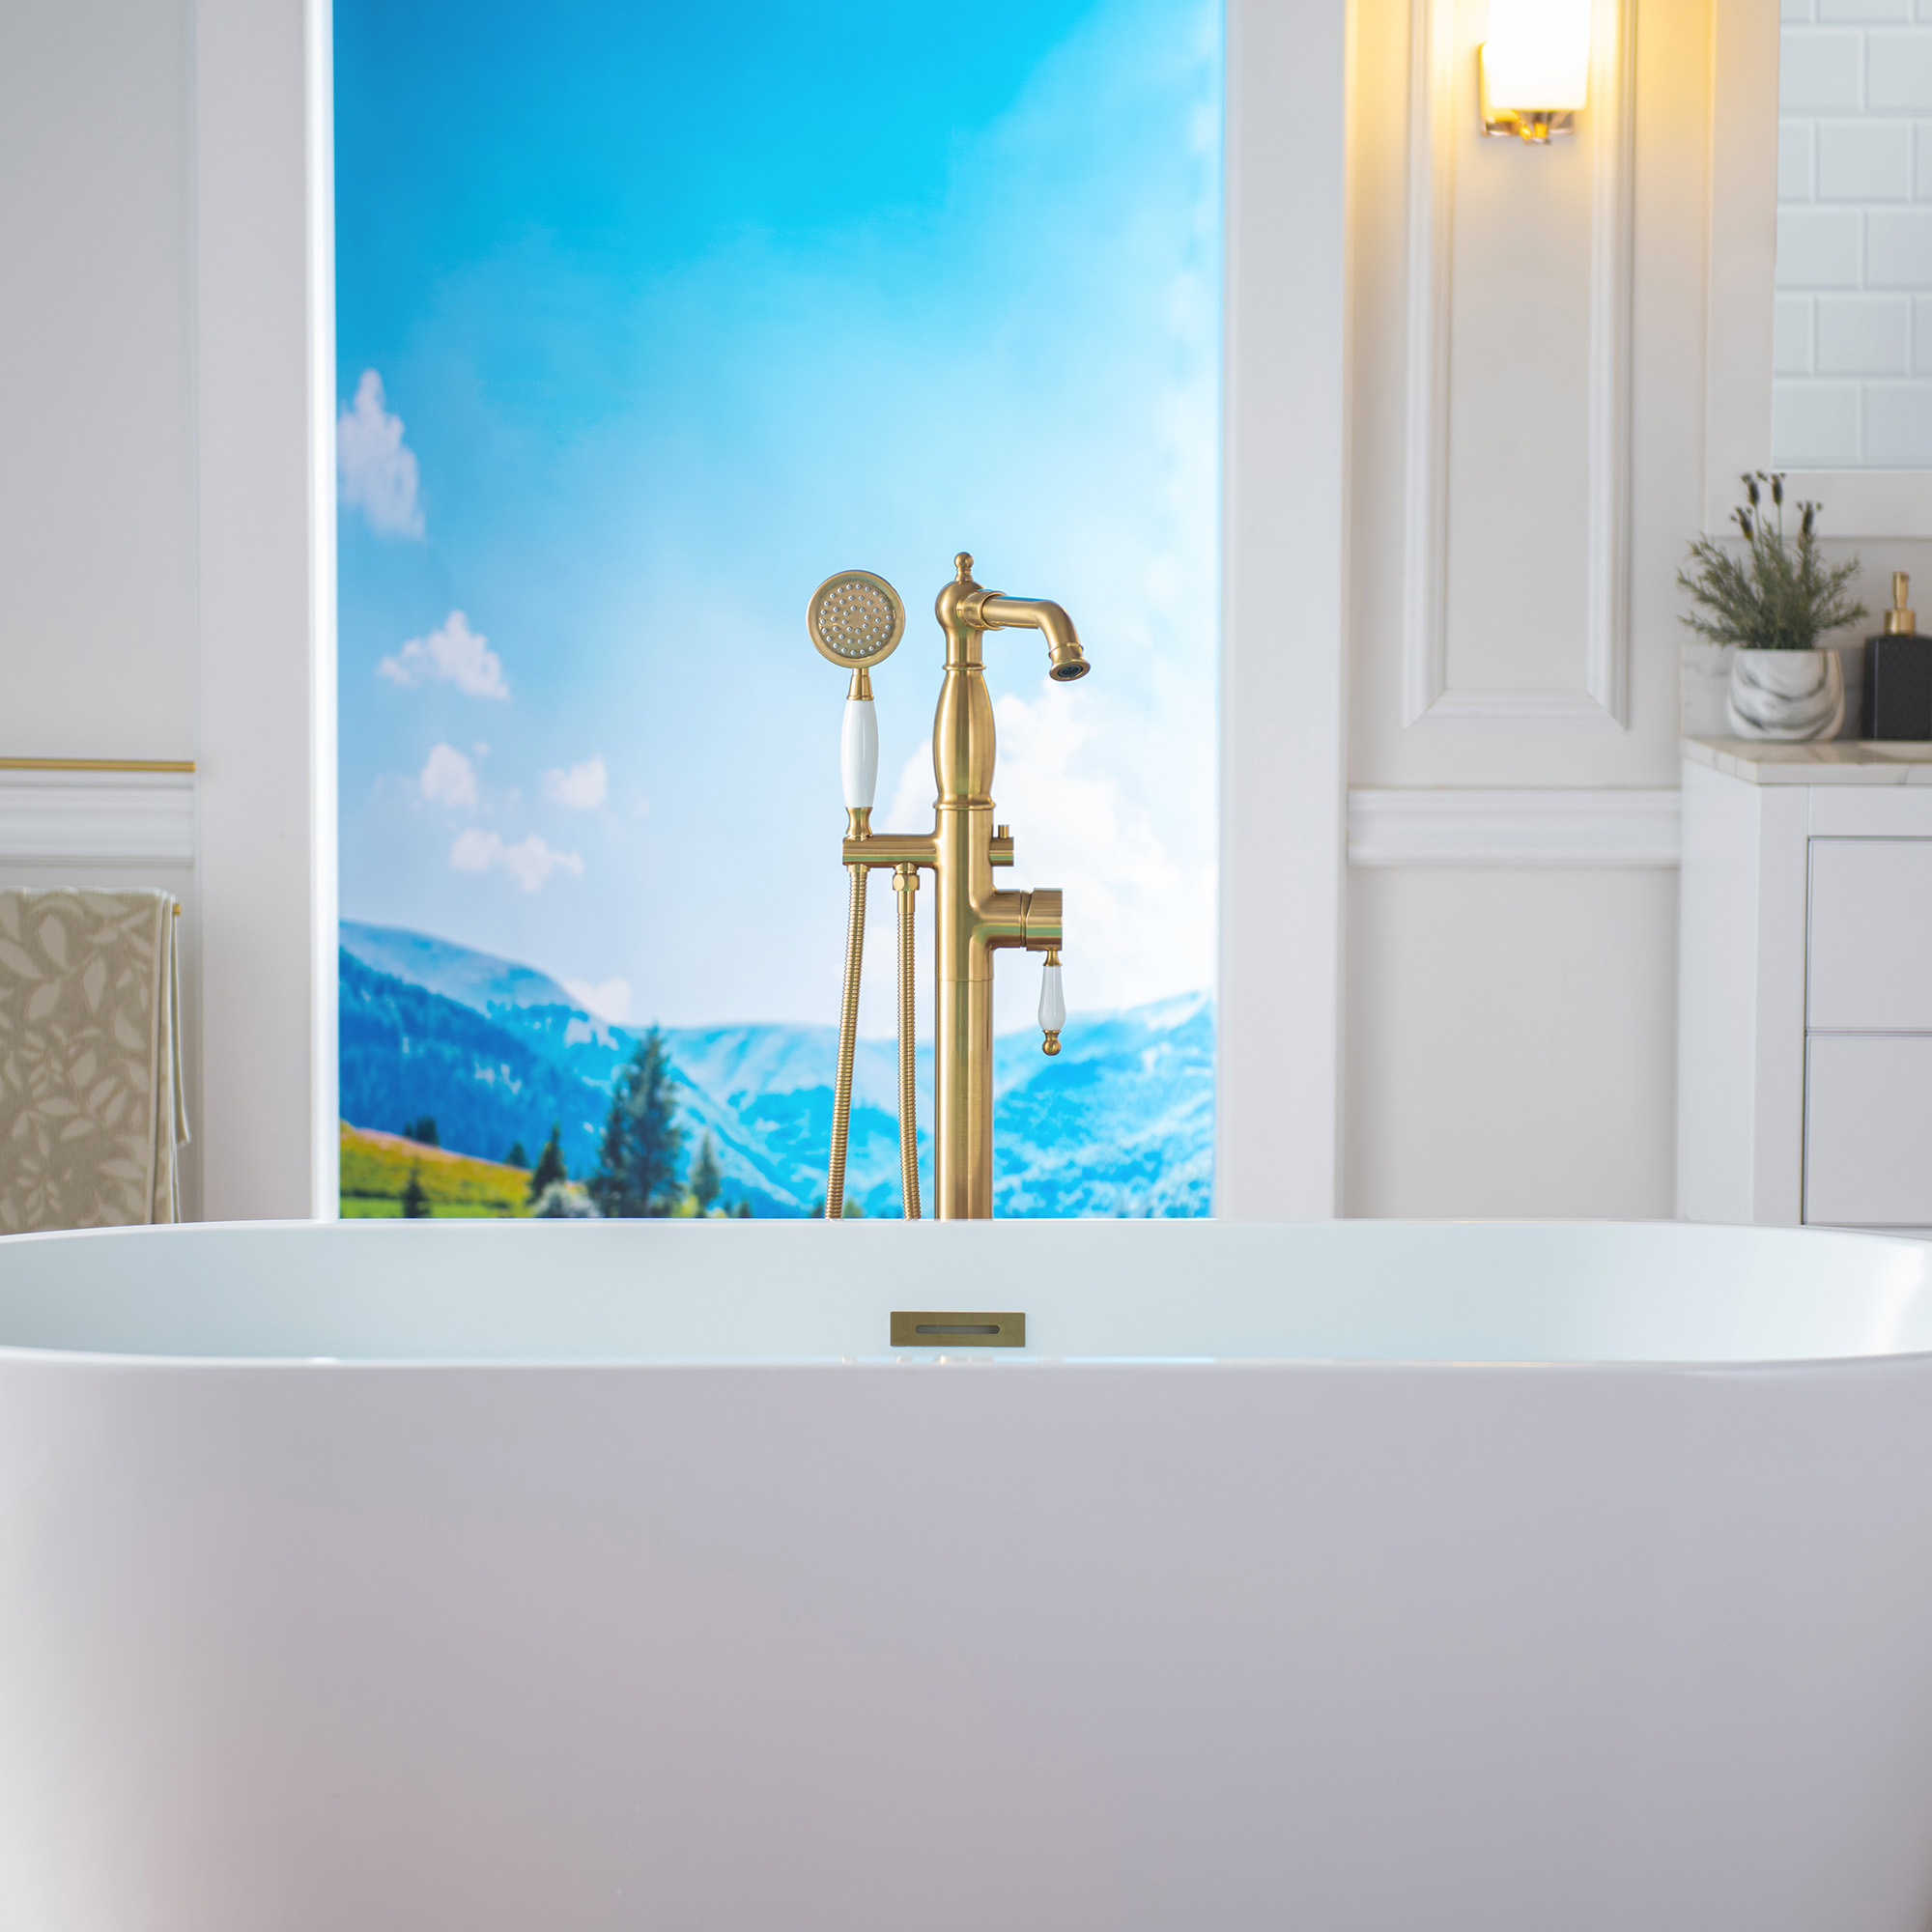  WOODBRIDGE F0050BG Fusion Single Handle Floor Mount Freestanding Tub Filler Faucet with Telephone Hand shower in Polished Gold Finis_12290